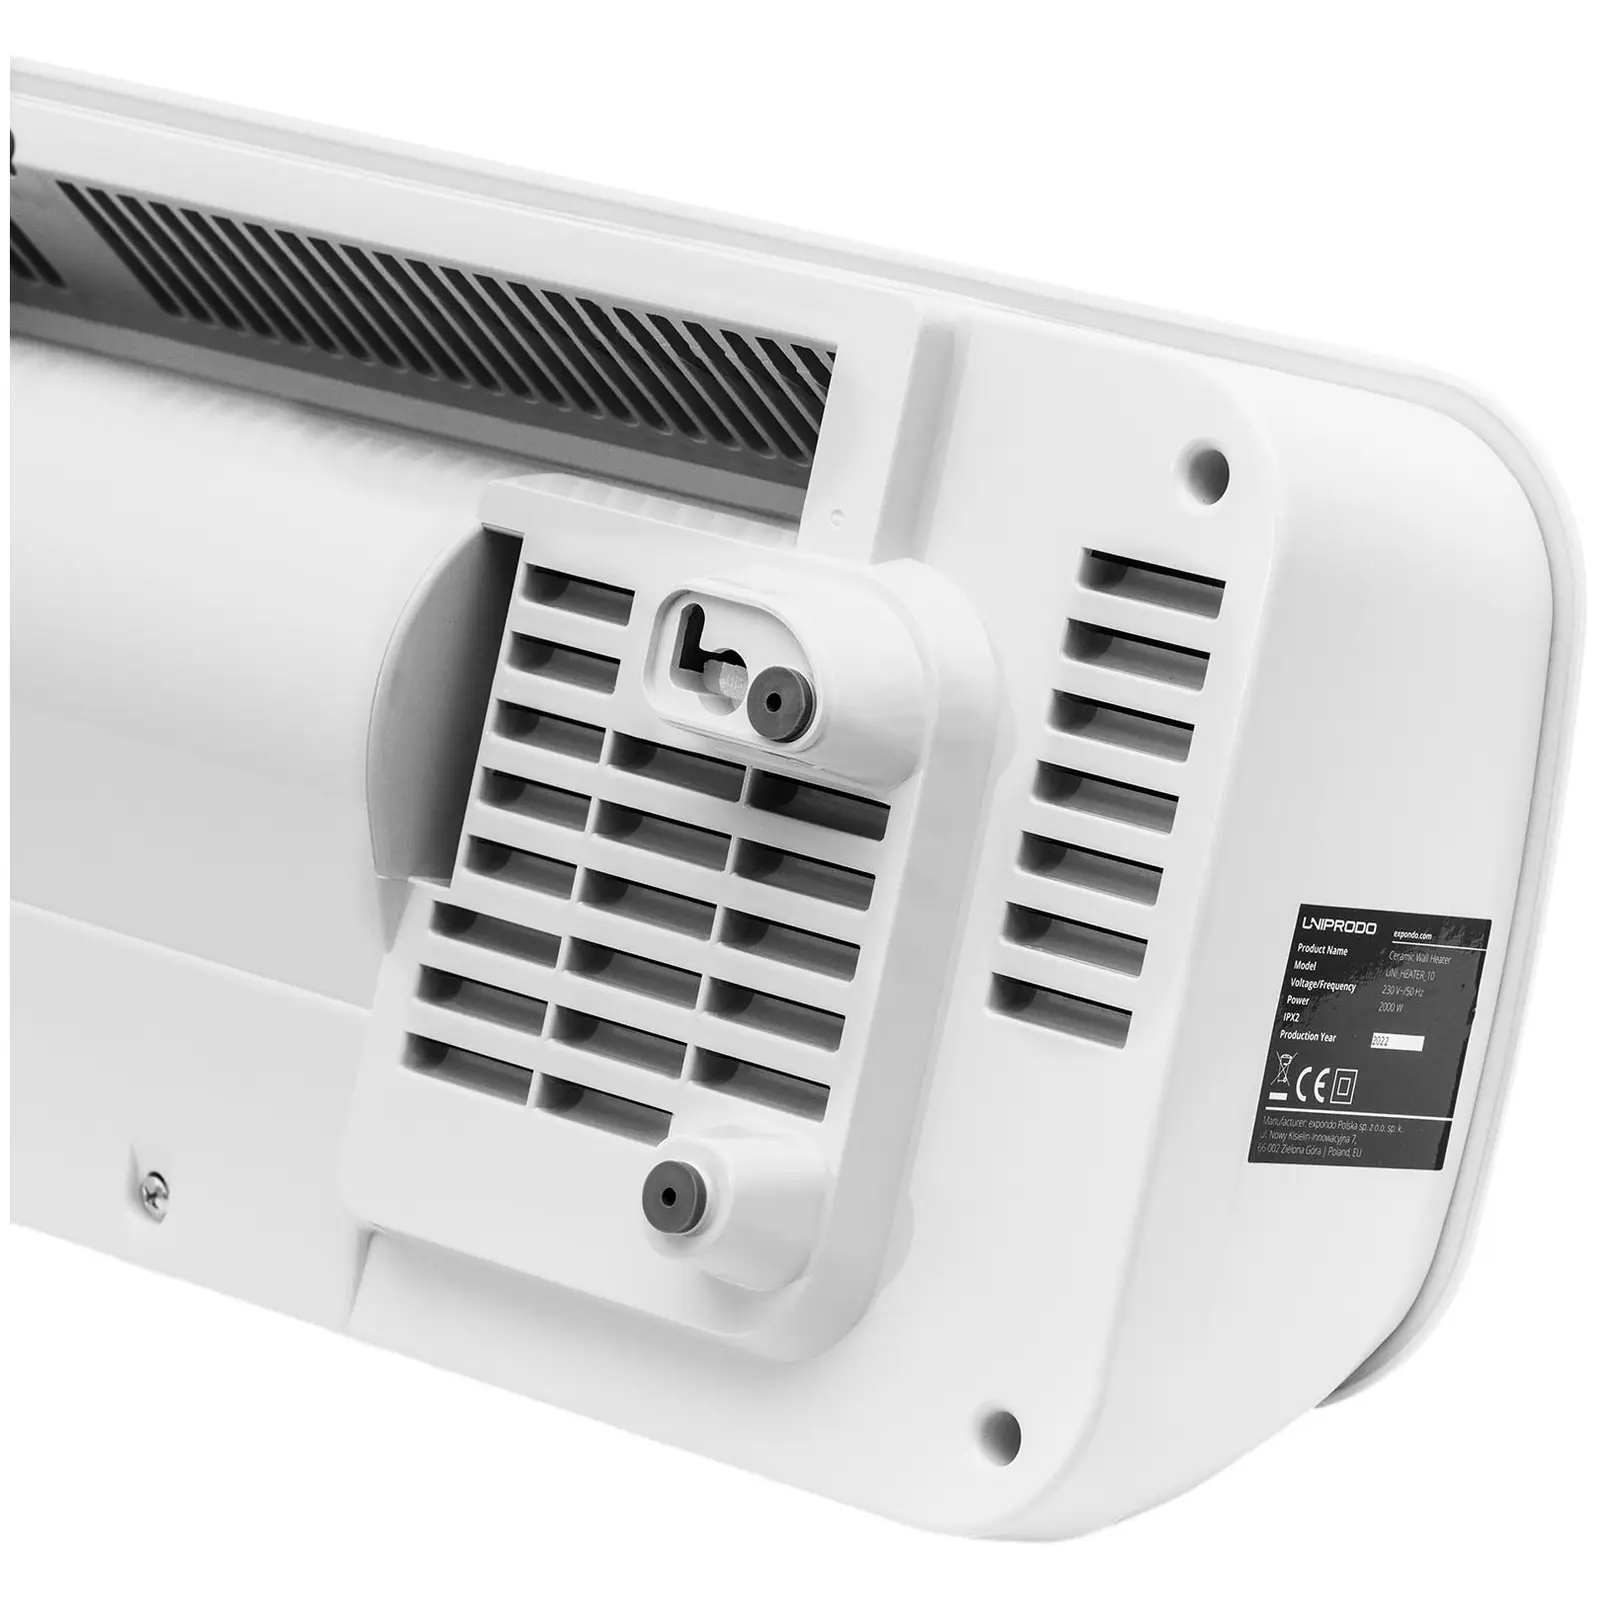 Wall-mounted Electric Wall Heater - ceramic - 10 - 49 °C - 1000/2000 W - remote control - extra narrow